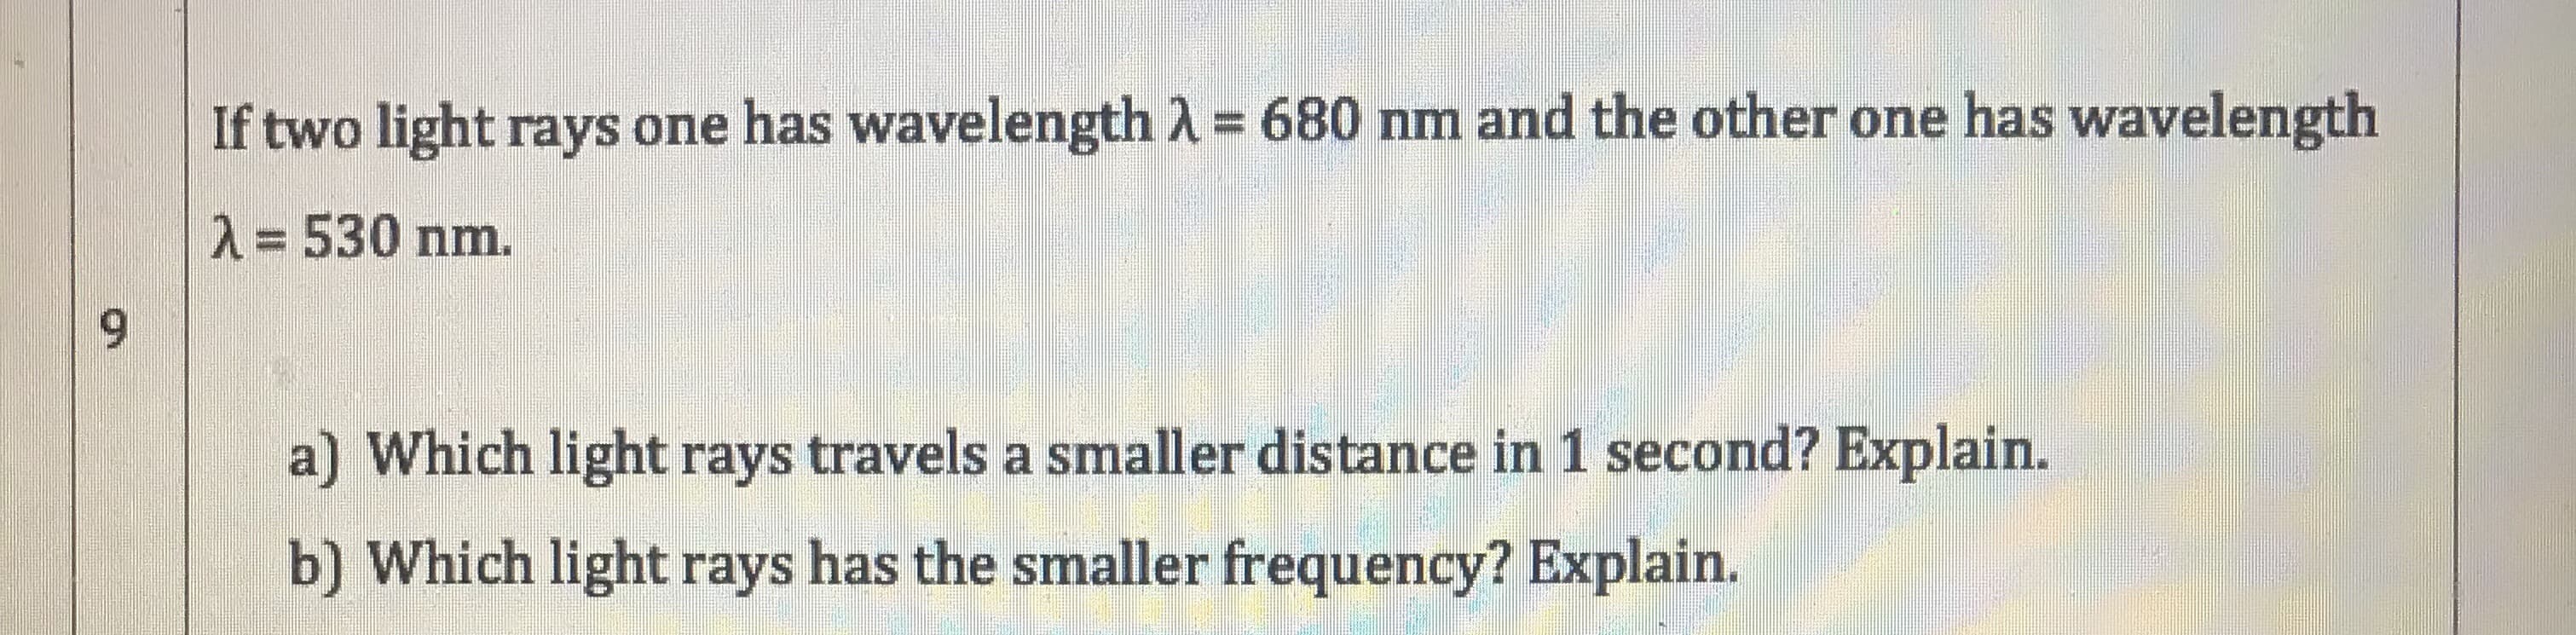 If two light rays one has wavelength A = 680 nm and the other one has wavelength
опе
2=530 nm.
6.
a) Which light rays travels a smaller distance in 1 second? Explain.
b) Which light rays has the smaller frequency? Explain.
